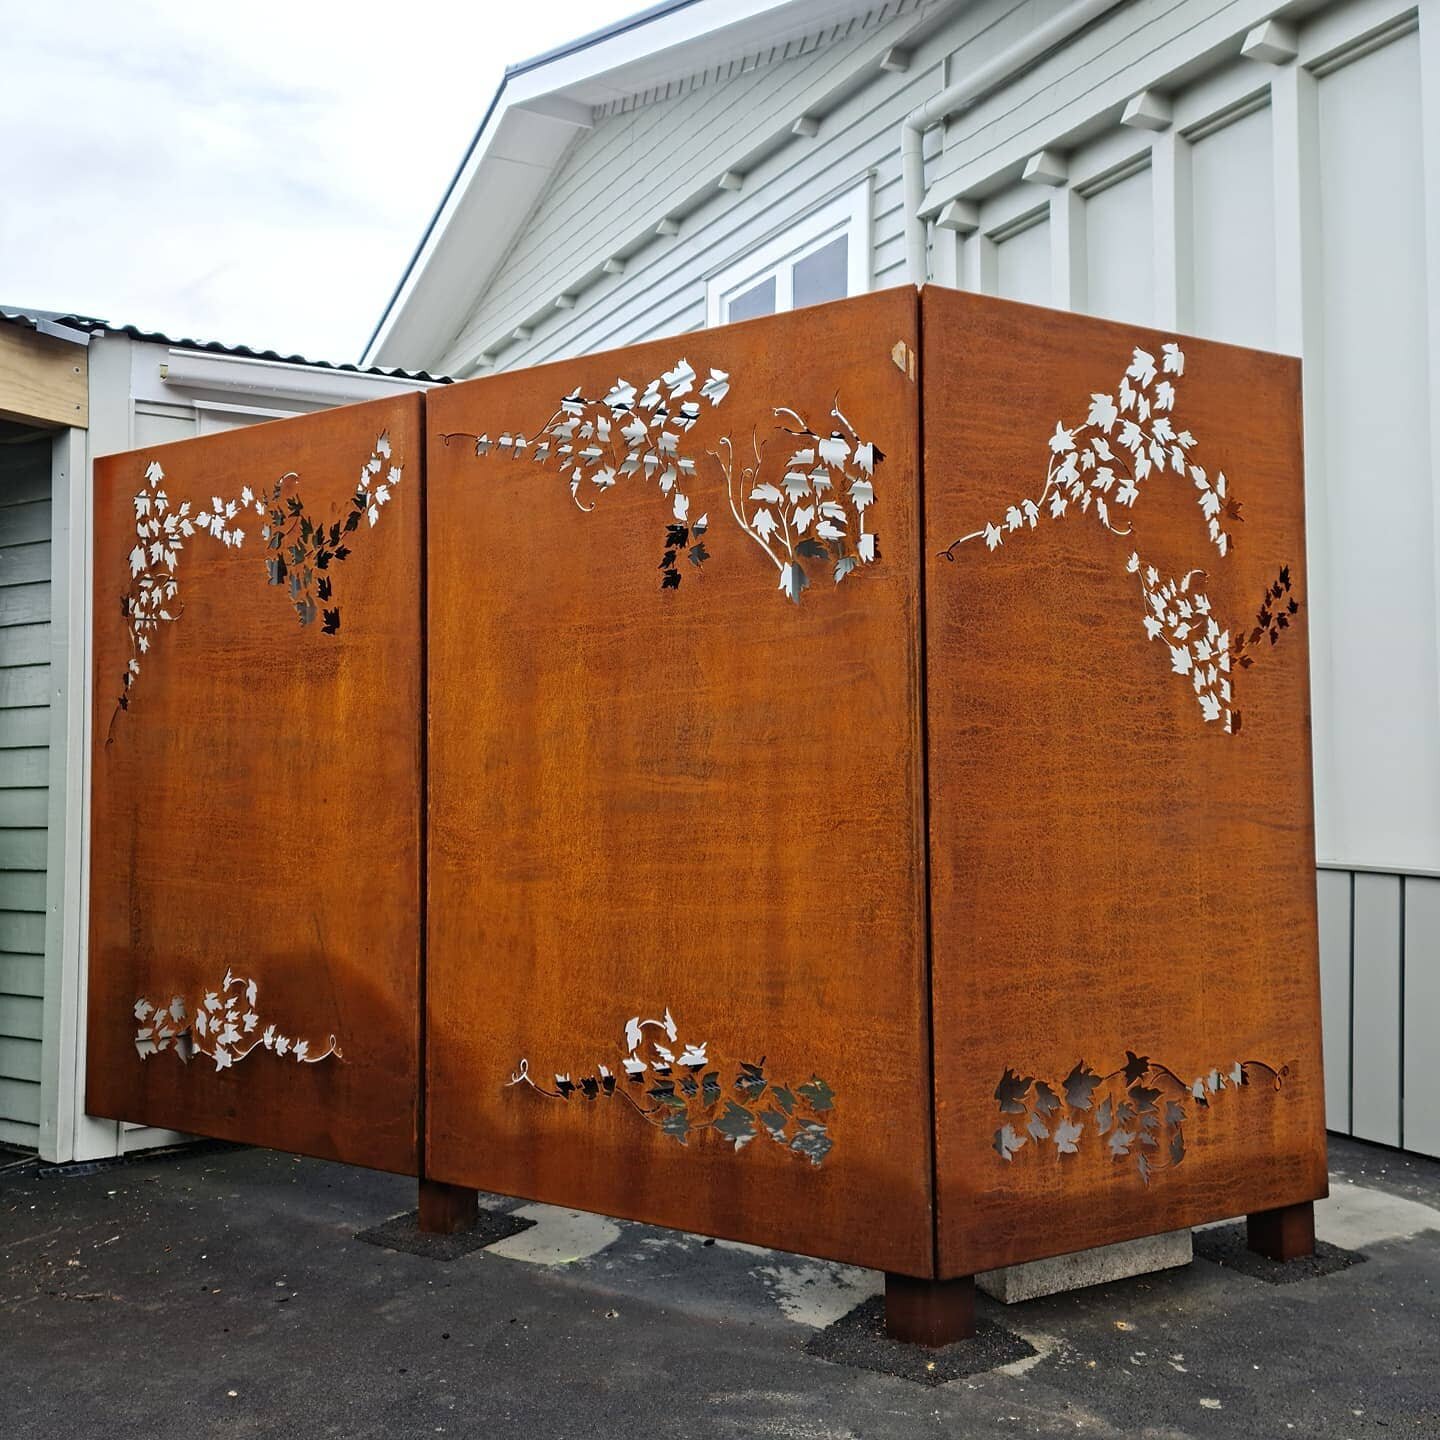 Corten steel panels and posts custom made to fit the angle required for privacy.
#cortensteel #fencing #privacyscreen #lasercut @theoutsidenz @janesweeneynz